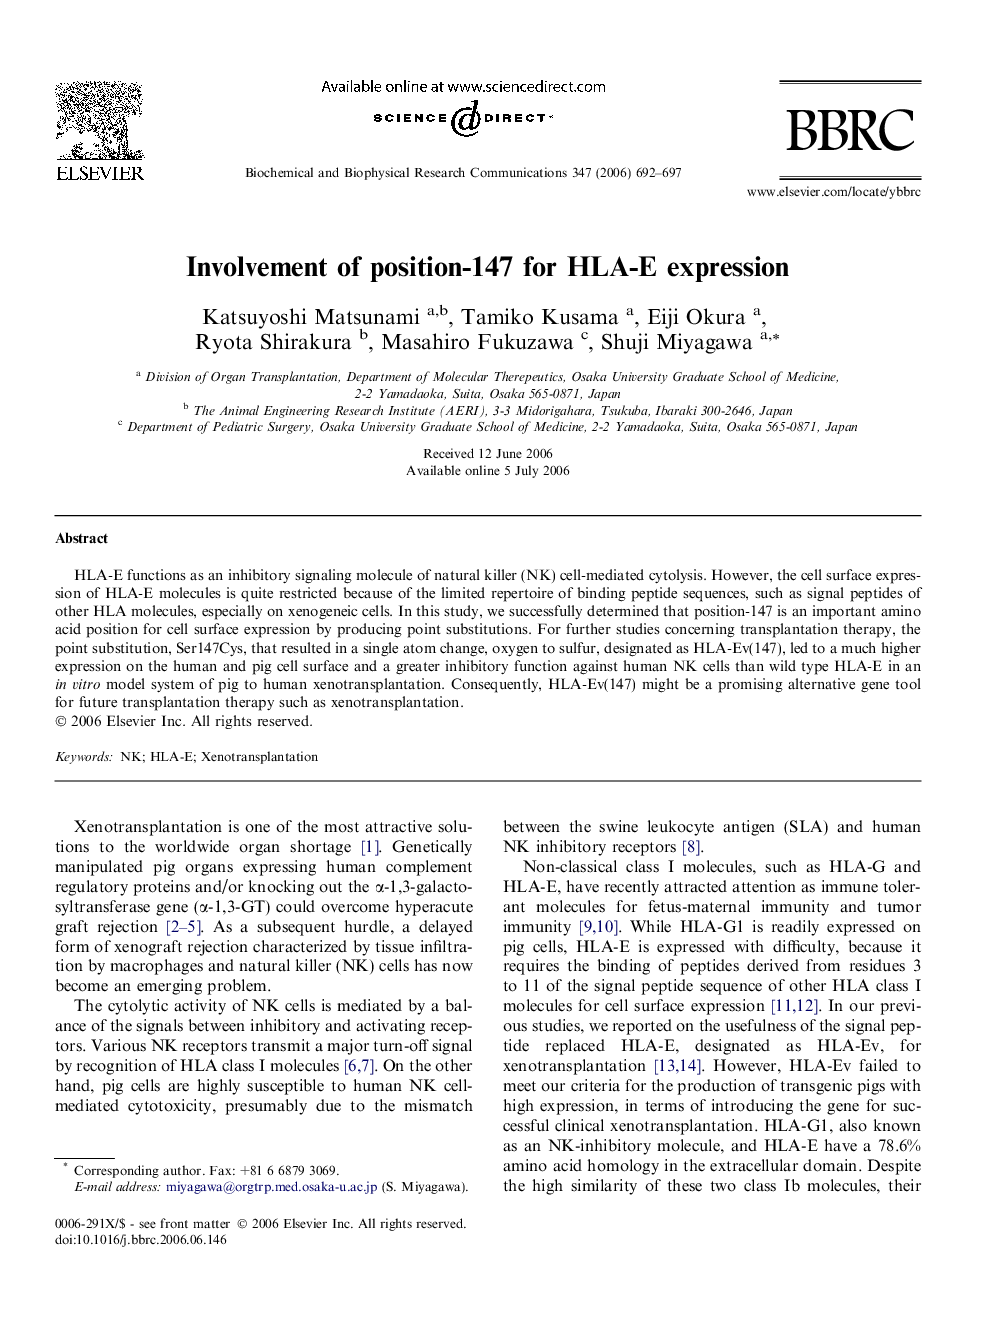 Involvement of position-147 for HLA-E expression